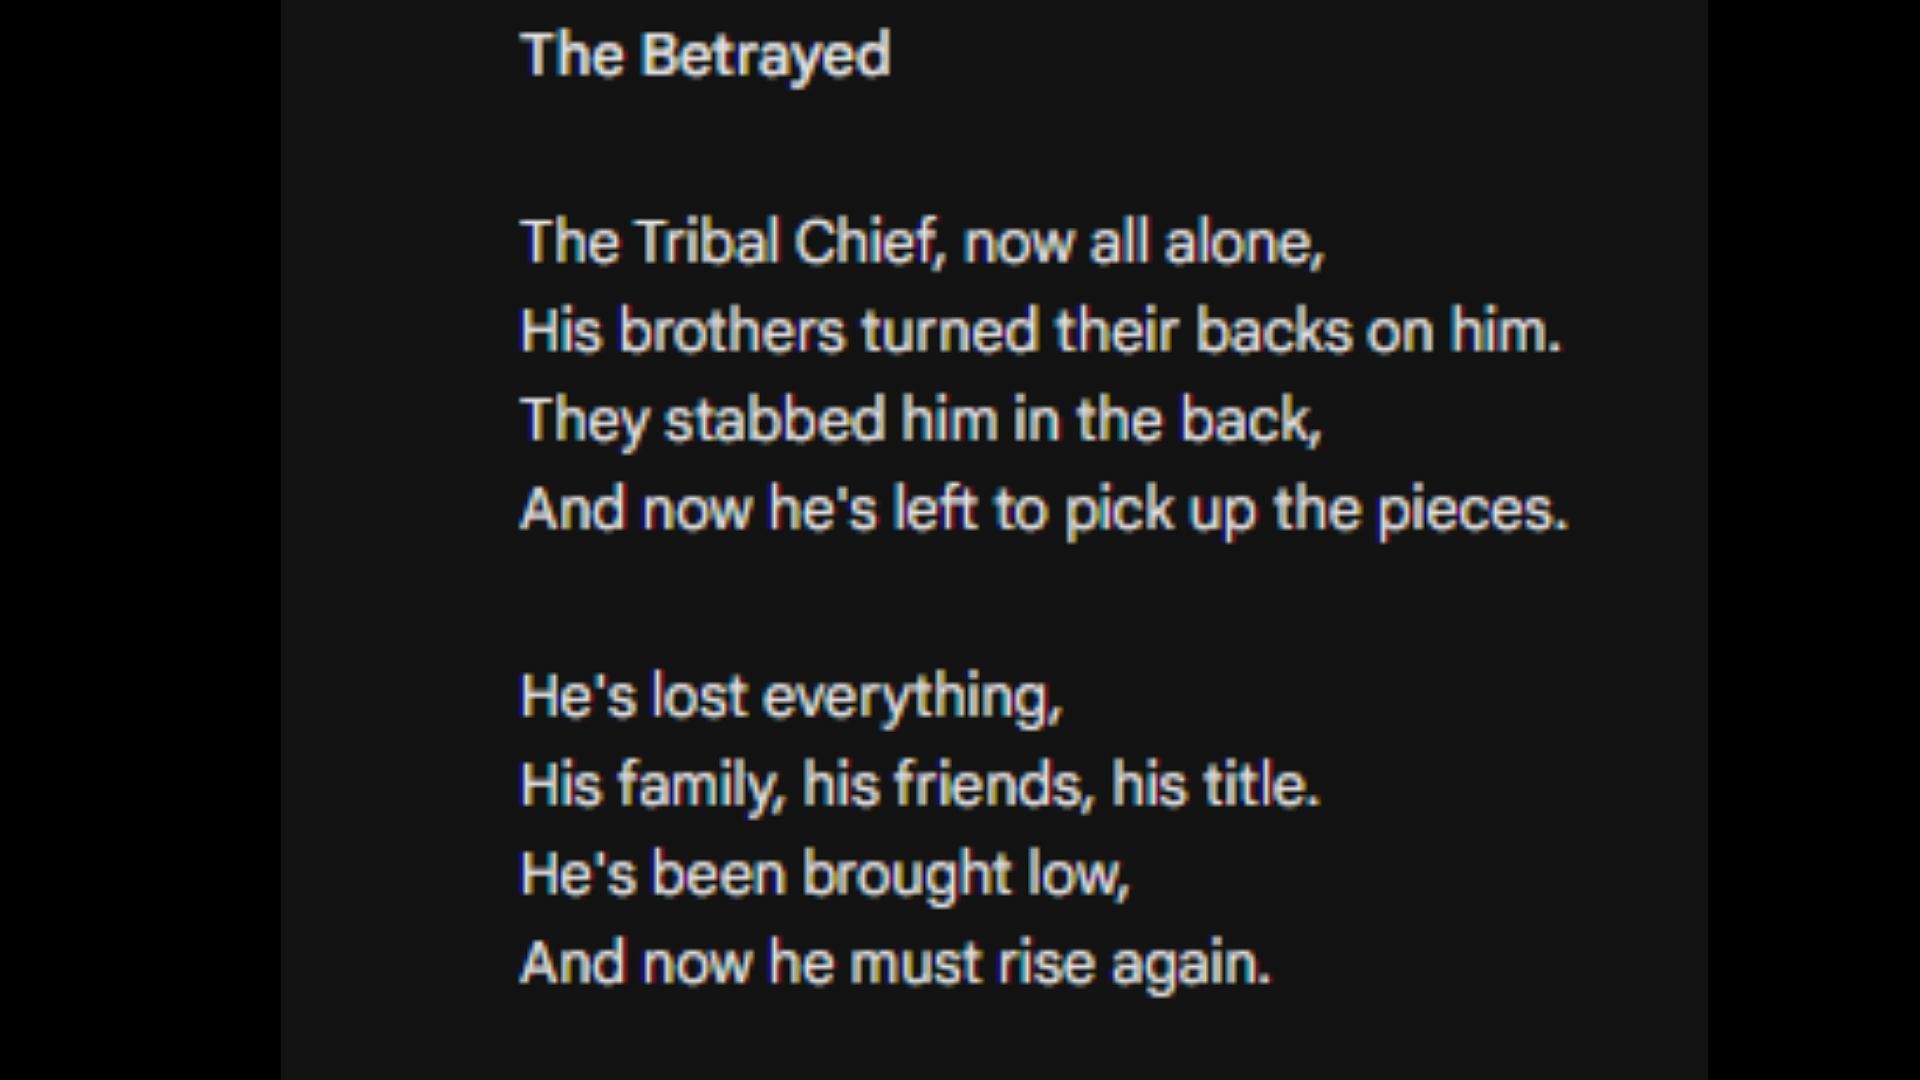 First half of The Betrayed poem